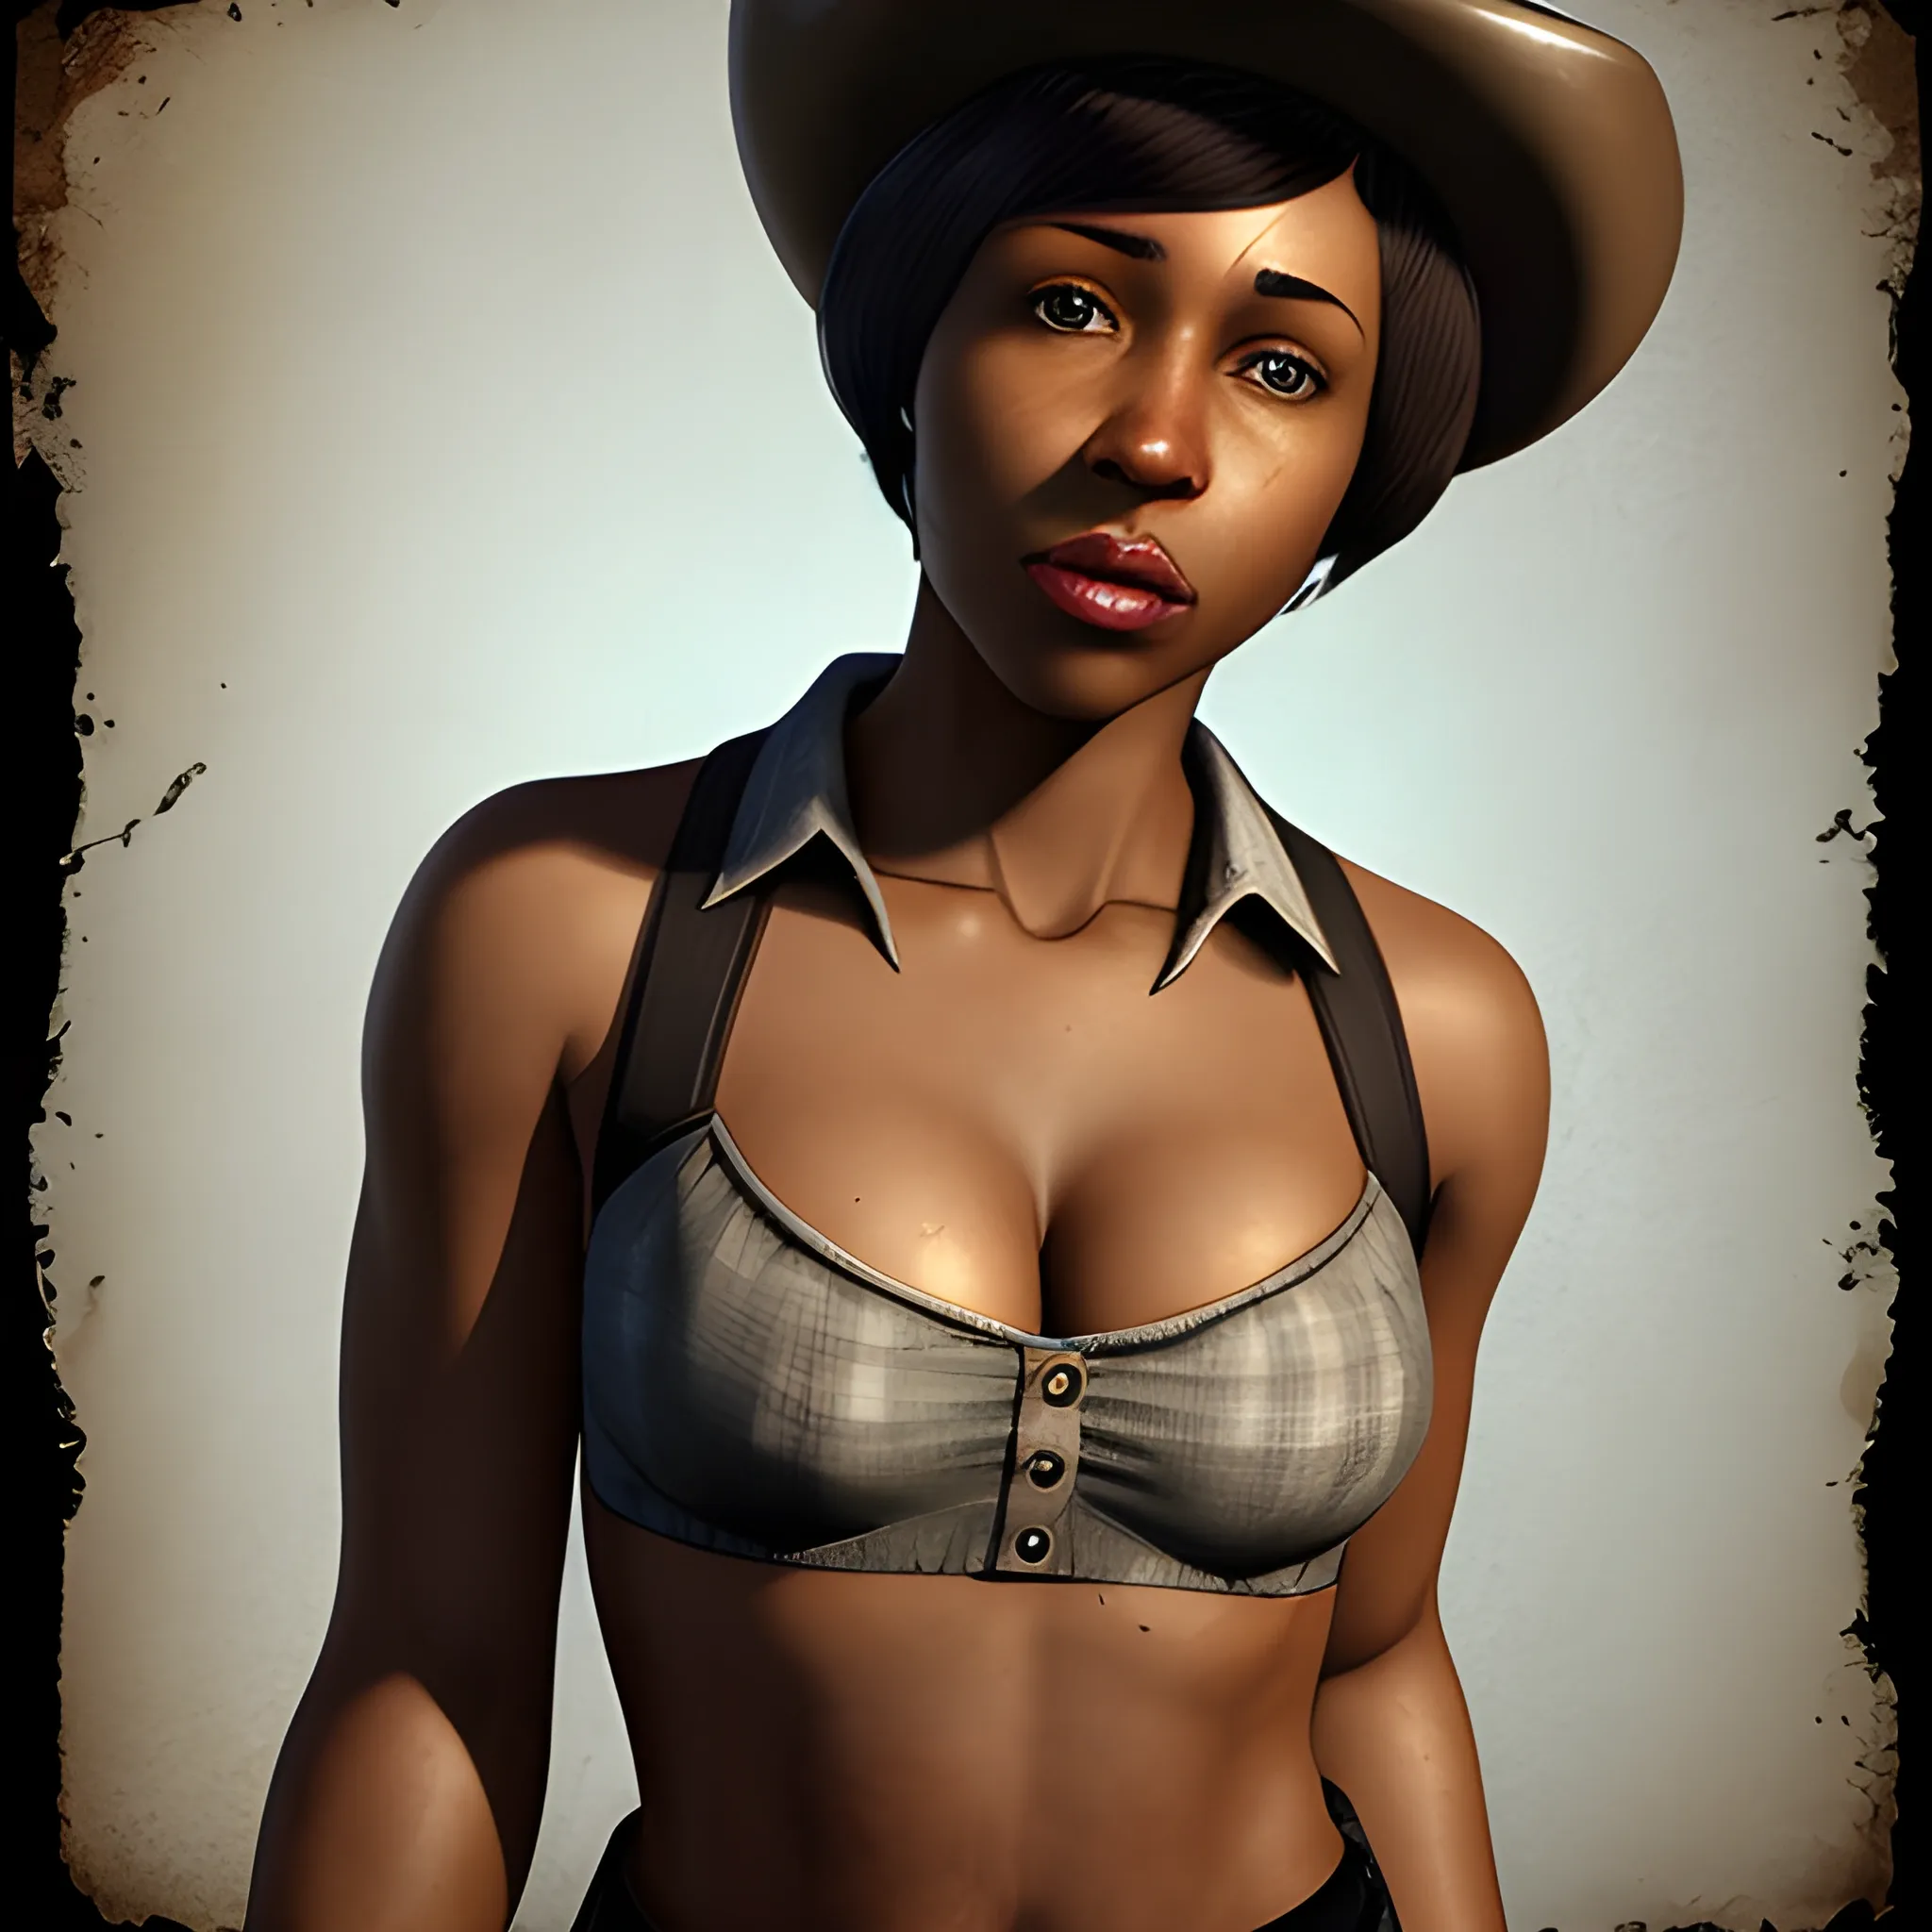 In the style of fallout 1, (masterpiece), (portrait photography), (portrait of an adult African-American female), no makeup, flat chested, white sports bra, cowboy hat, unbuttoned red flannel shirt, bob-cut hairstyle, black hair, black eyes